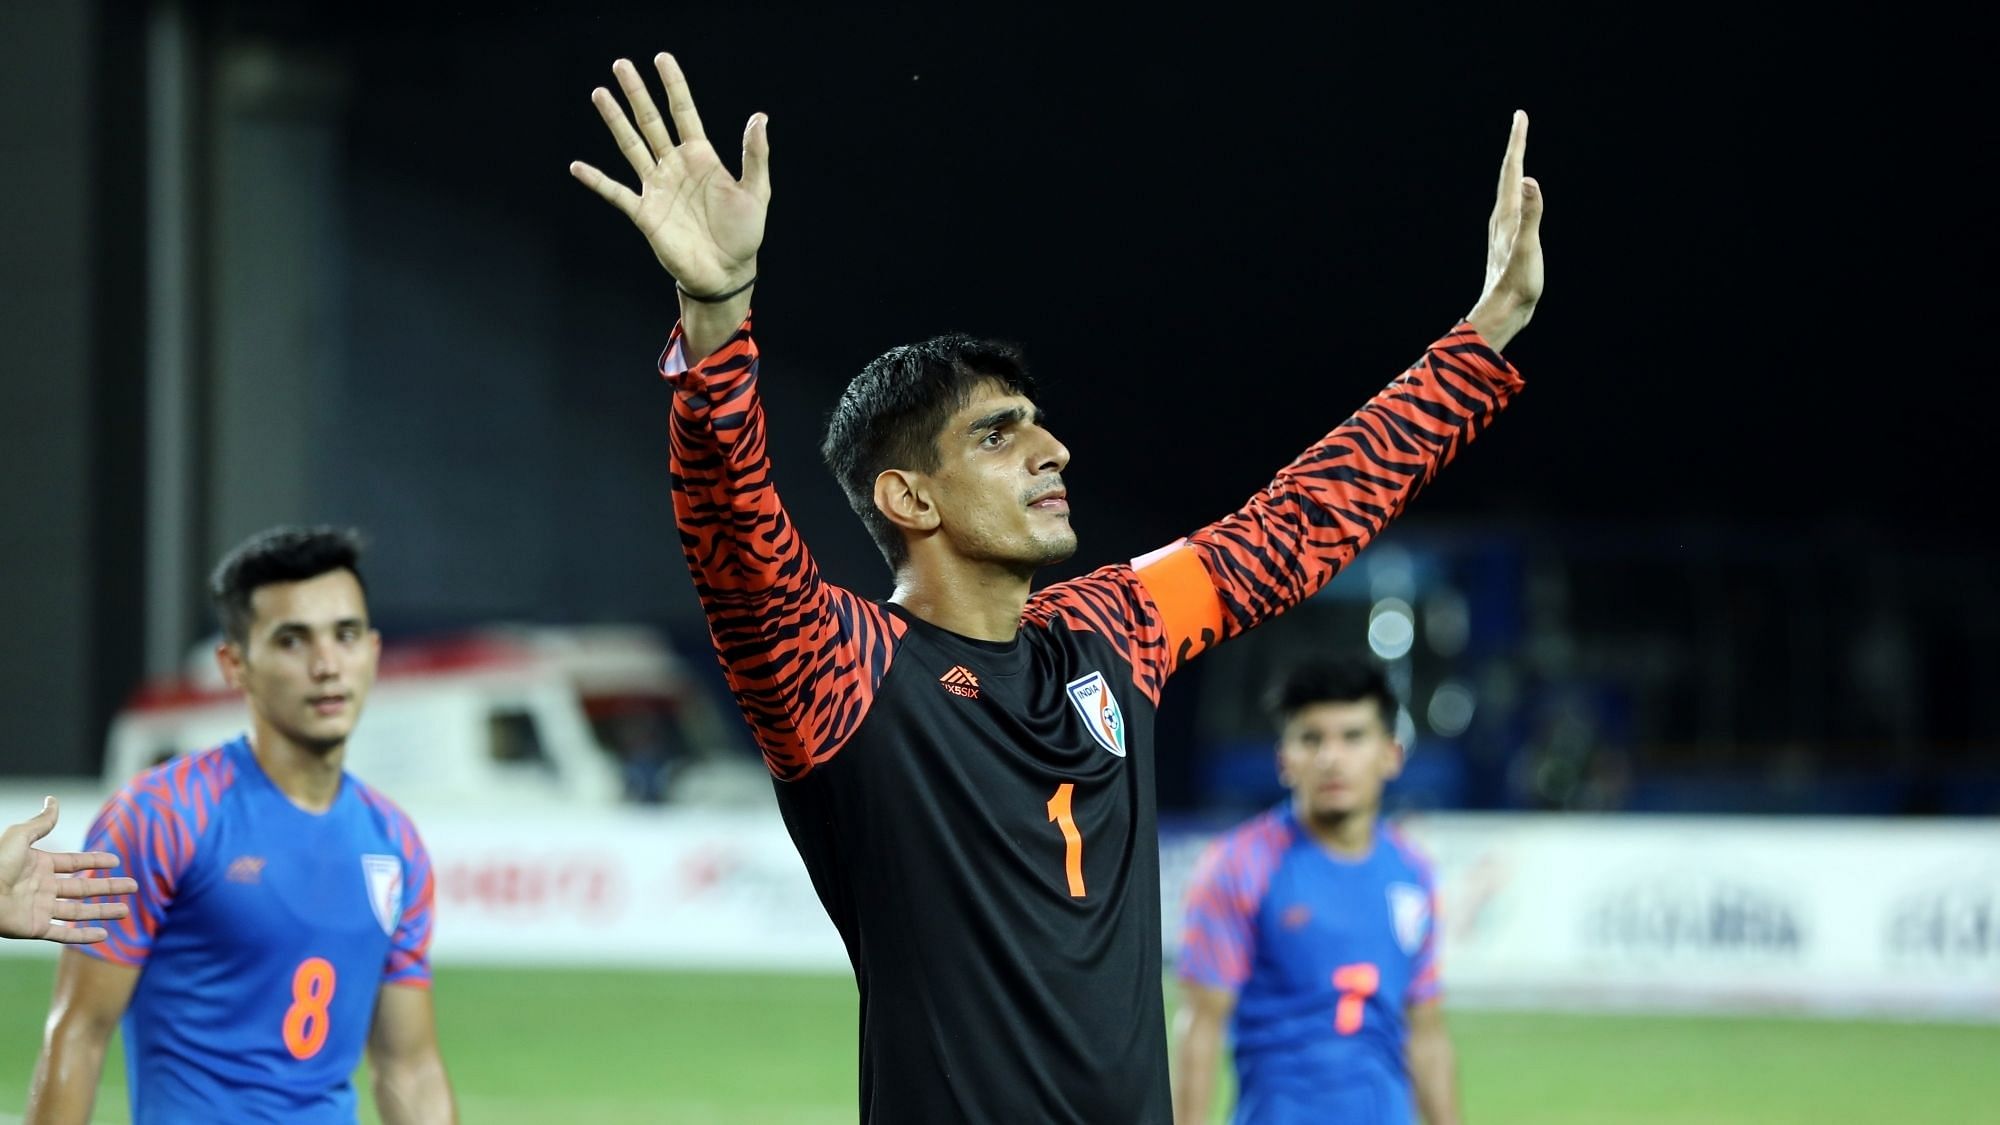 File picture of Indian goal-keeper Gurpreet Singh Sandhu who helped India draw Asian Champions Qatar 0-0 in a World cup qualifier.